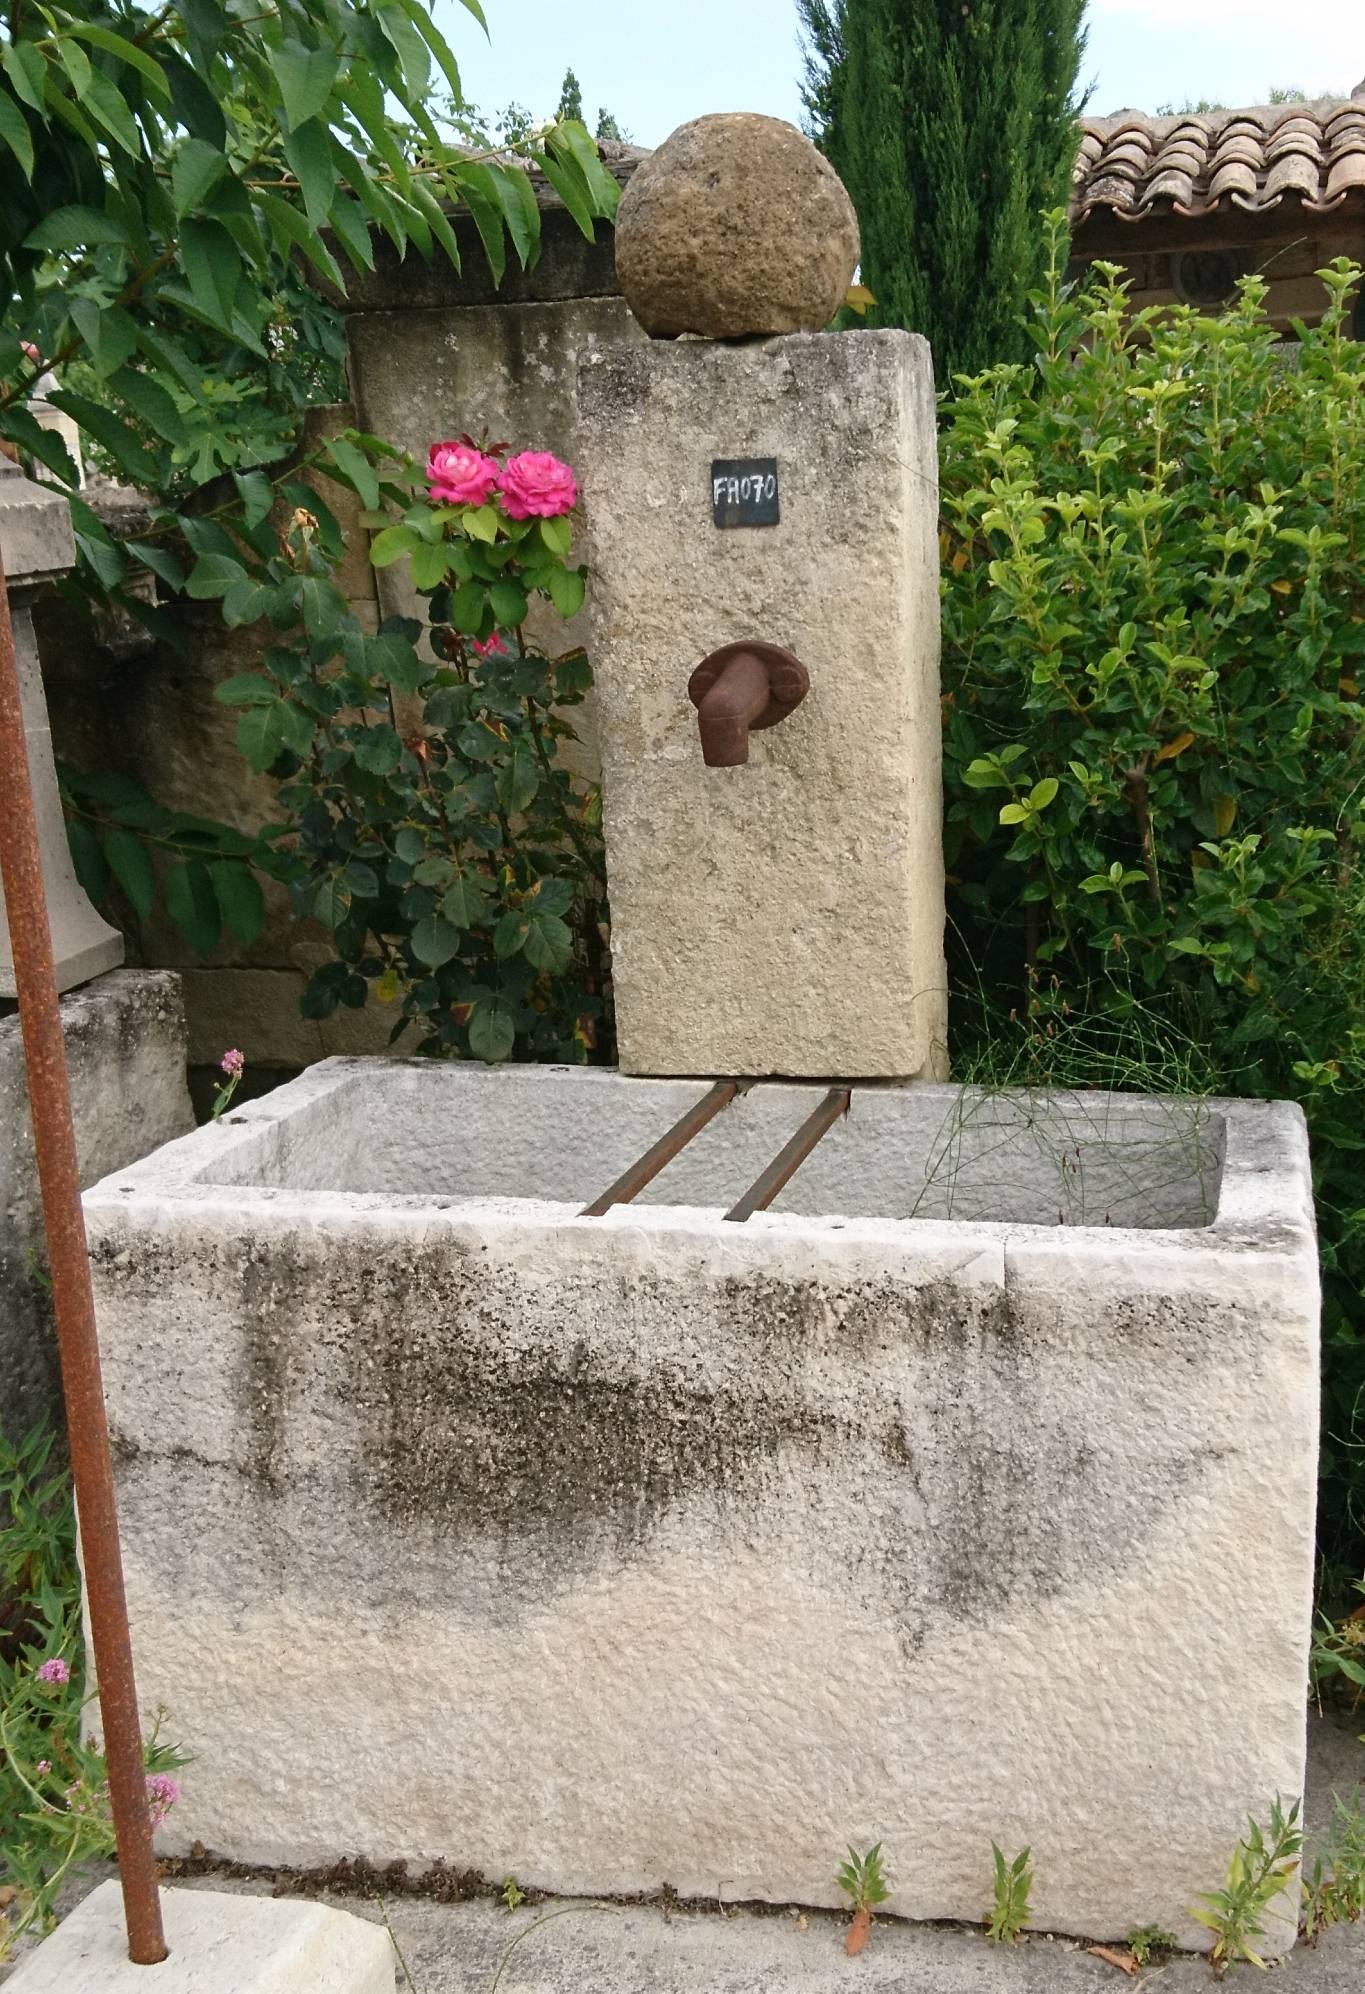 This lovely ornamental fountain is a 100% handcrafted garden fountain made with authentic reclaimed materials, one of the kind fountain 100% made in Provence!

This wall fountain consists of a large rectangular basin carved in a white hard stone